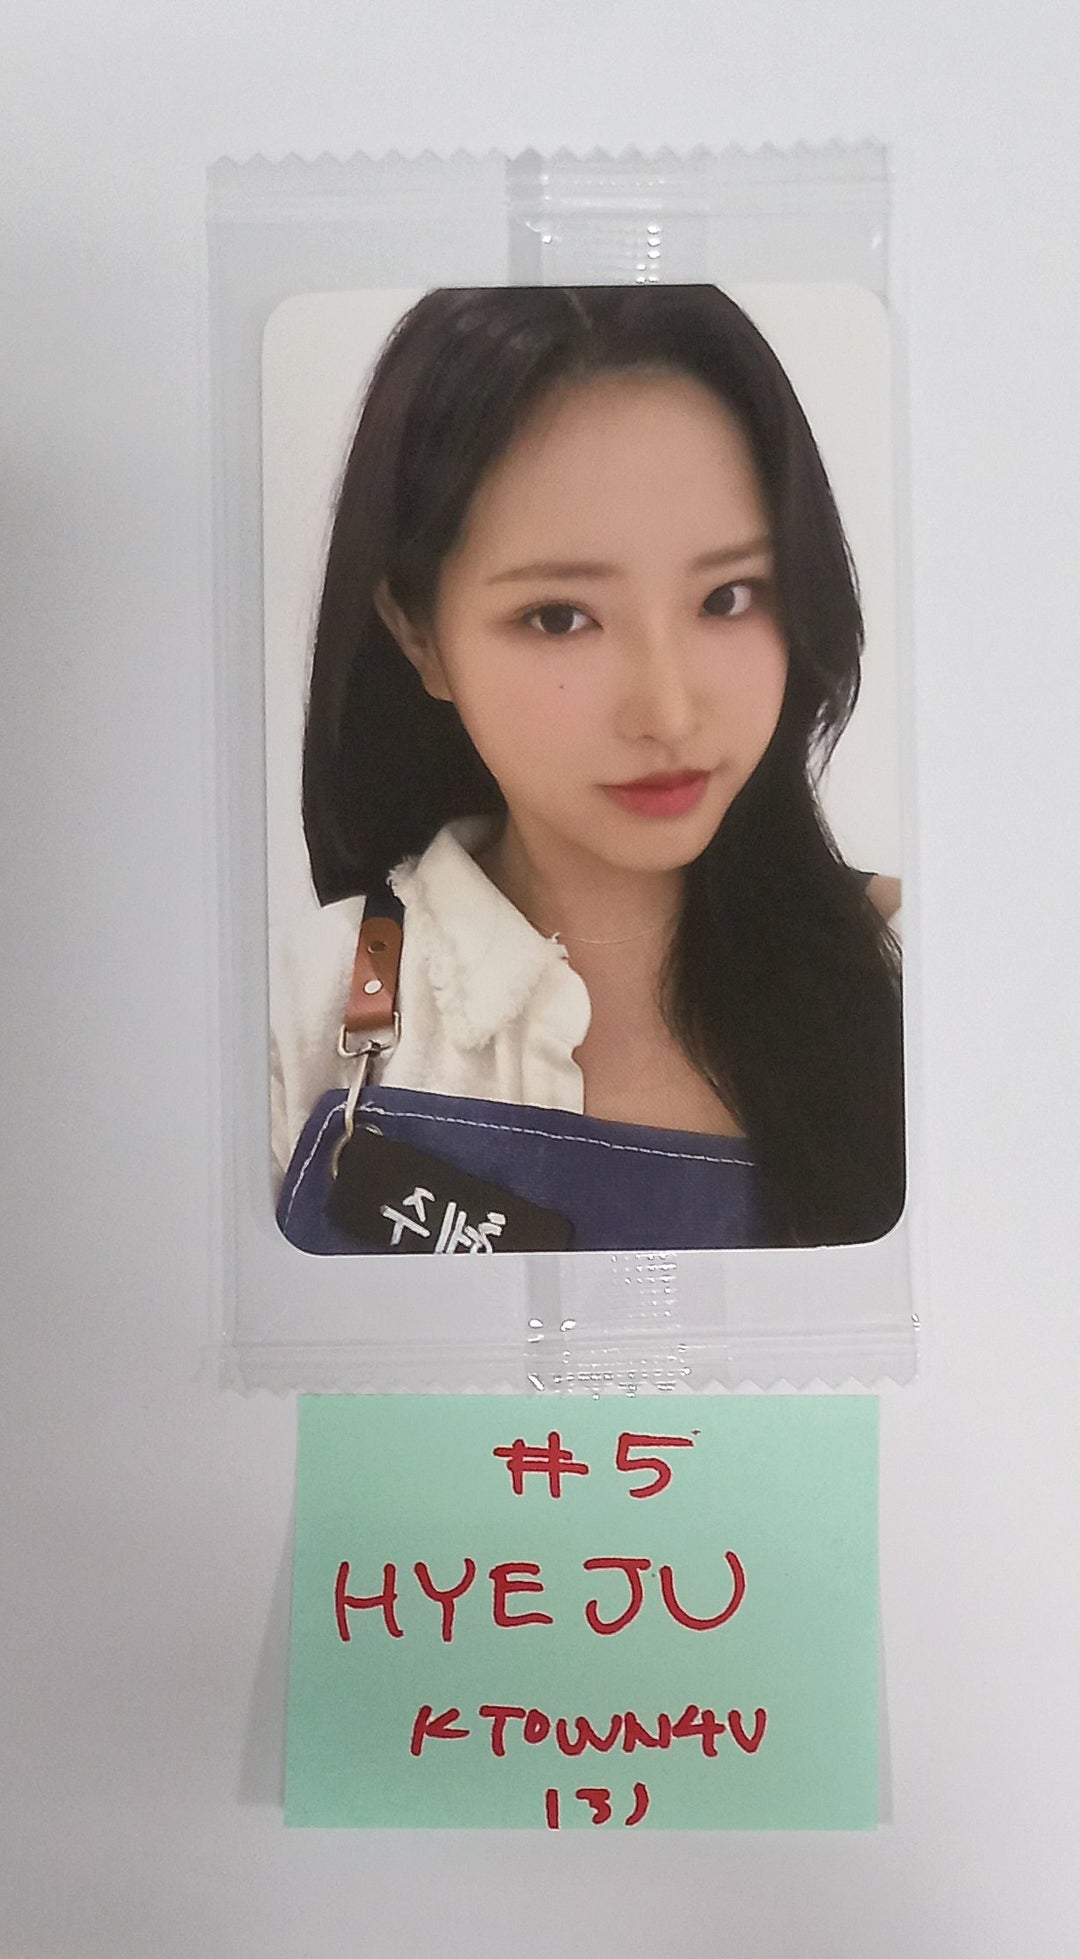 Loossemble "One of a Kind" - Ktown4U Cafe Event Photocard [24.5.9]